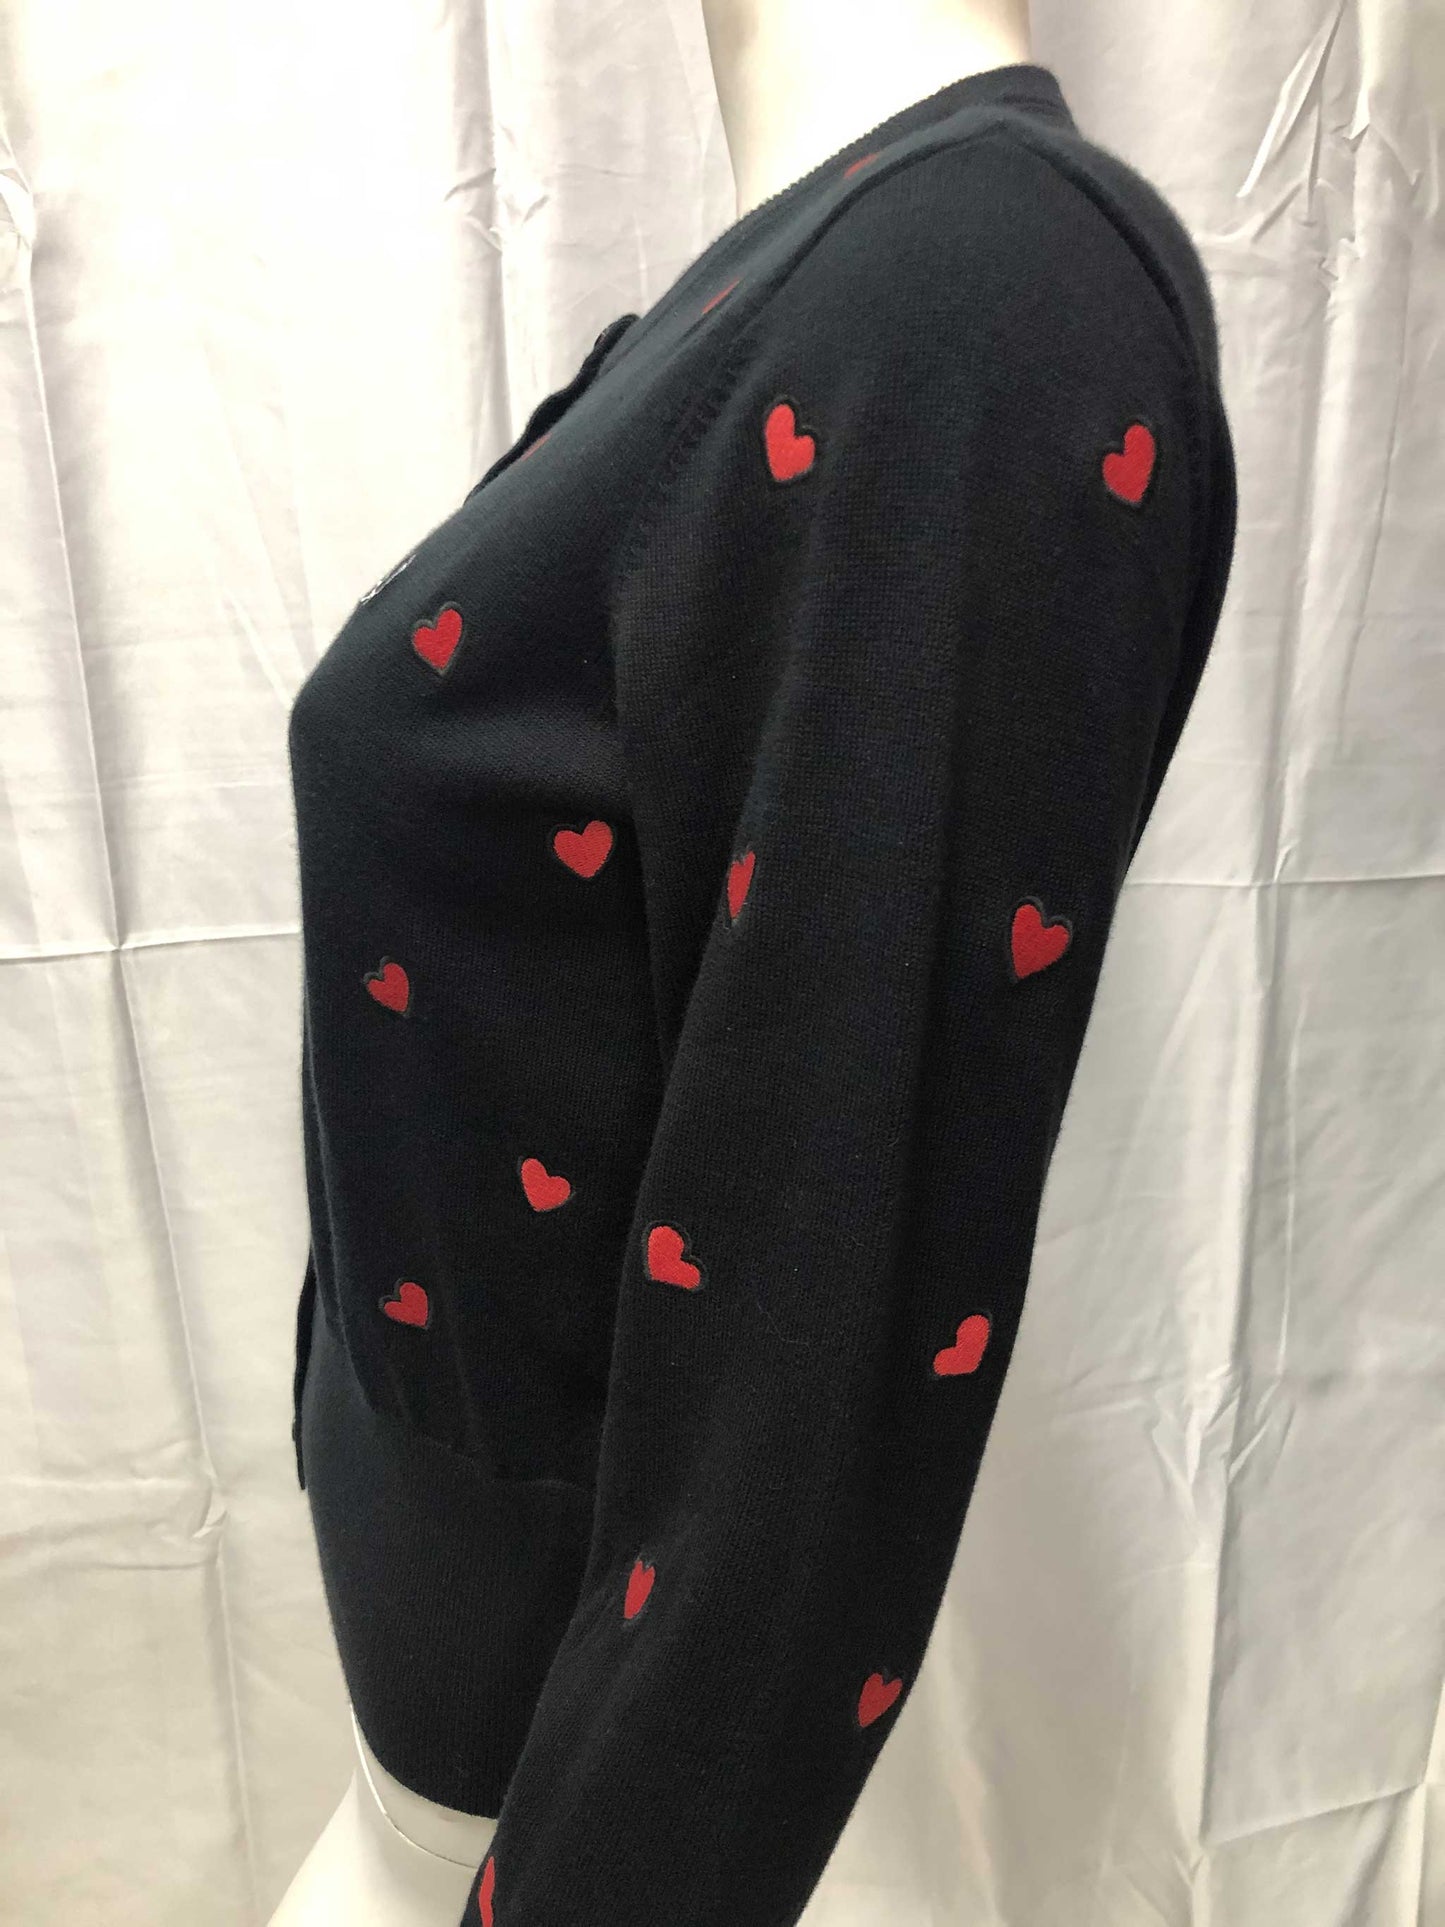 Amy Winehouse Embroidered Cardigan